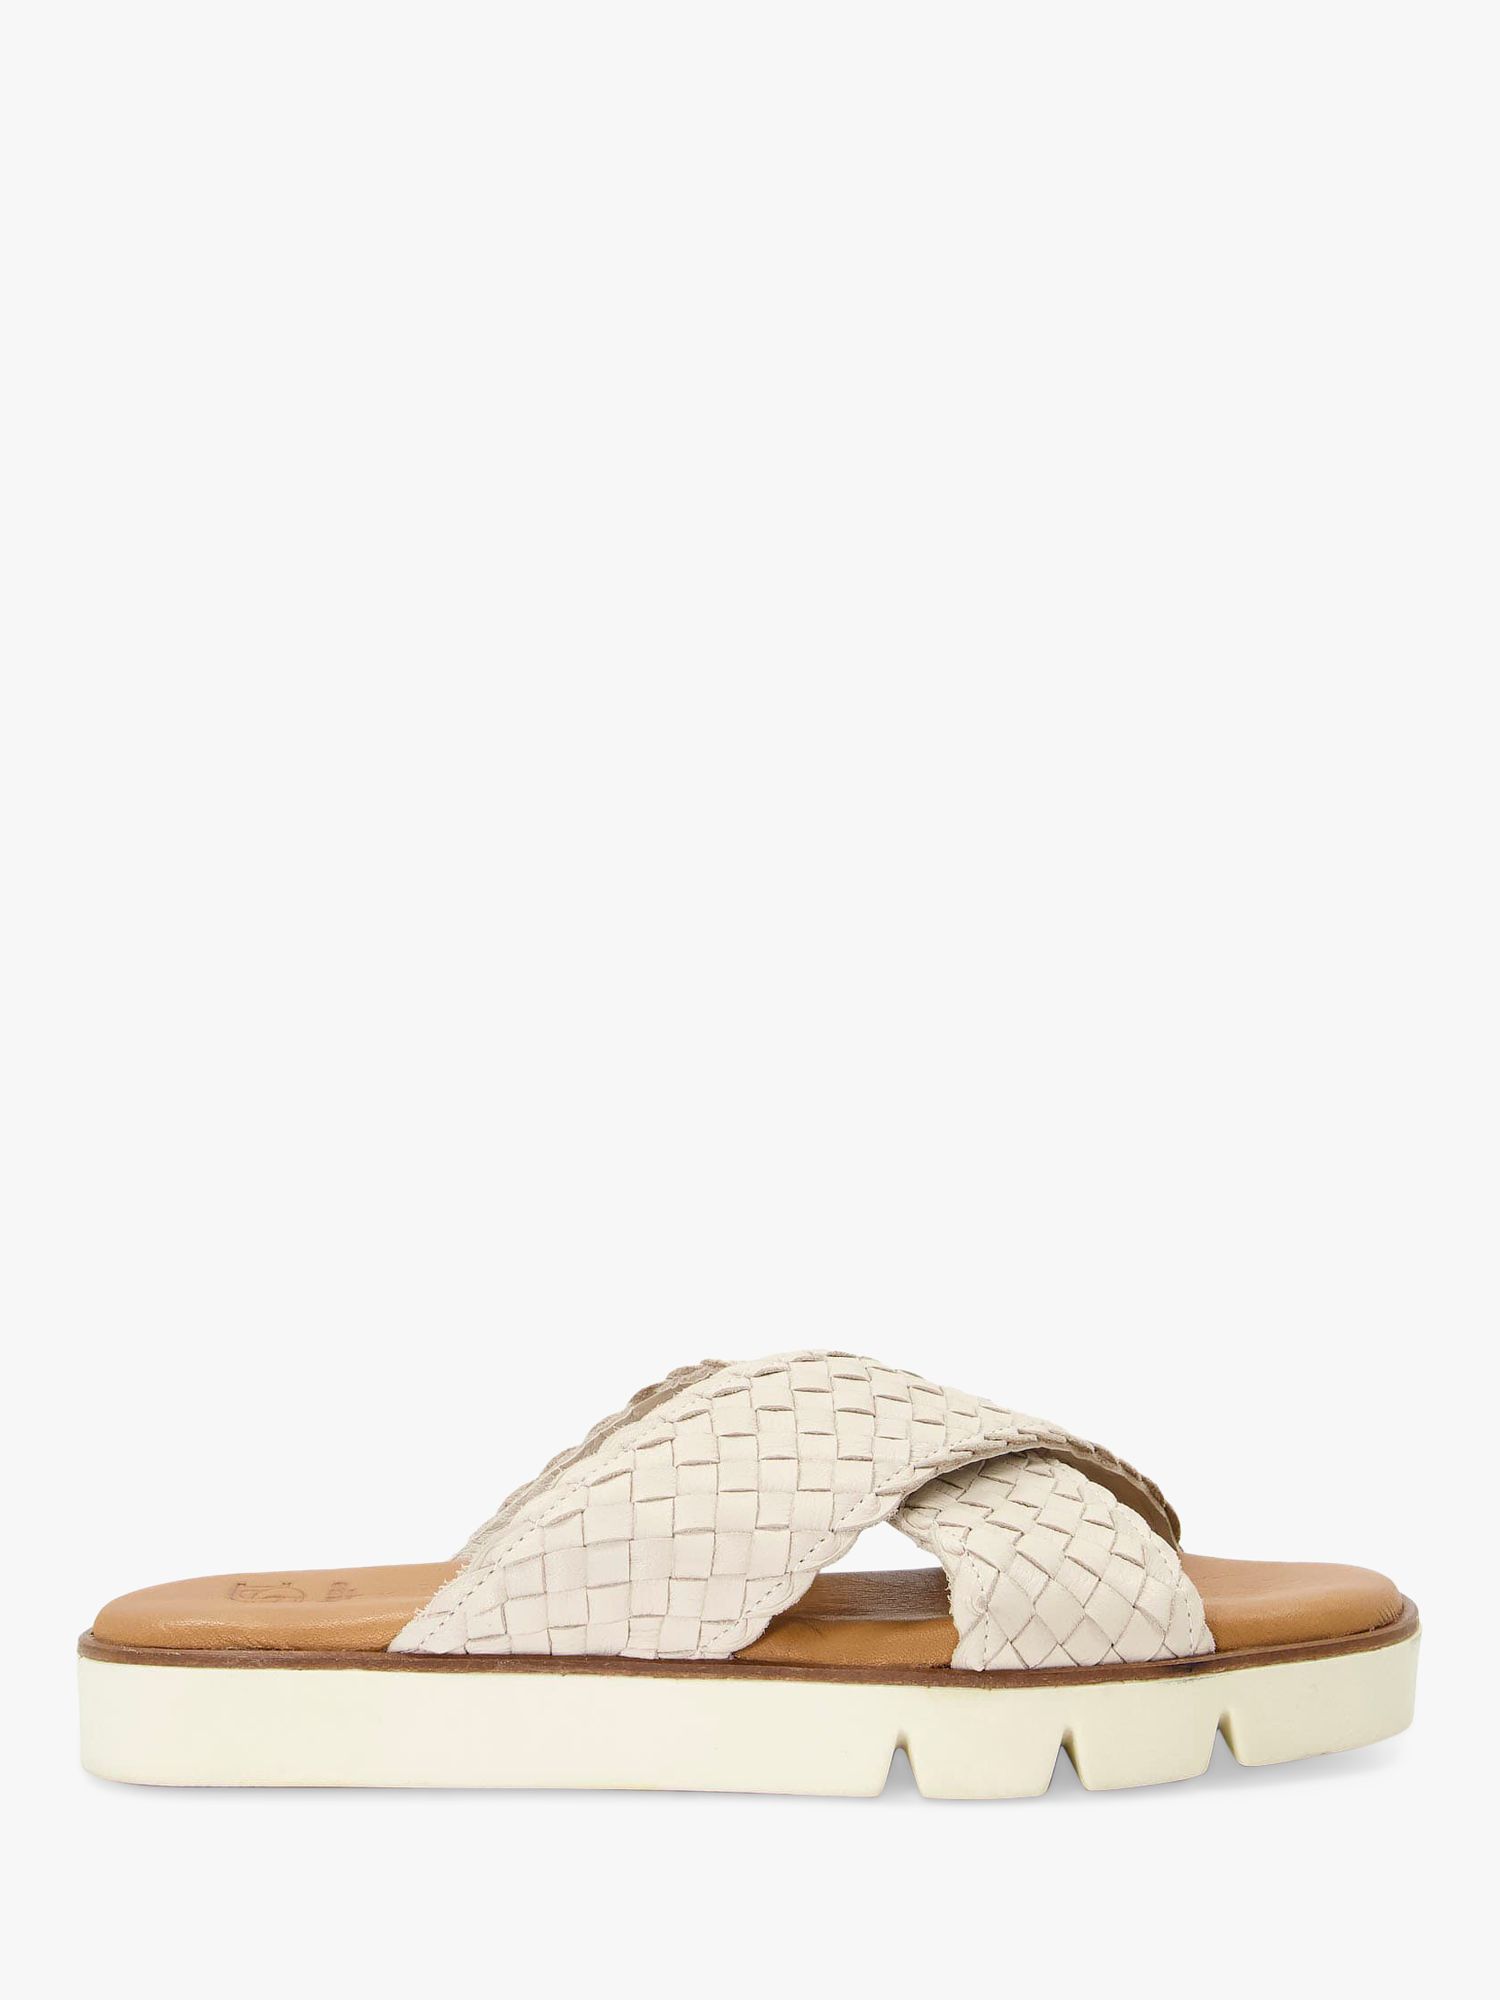 Buy Dune Lexey Leather Woven Strap Cross Over Sandals Online at johnlewis.com